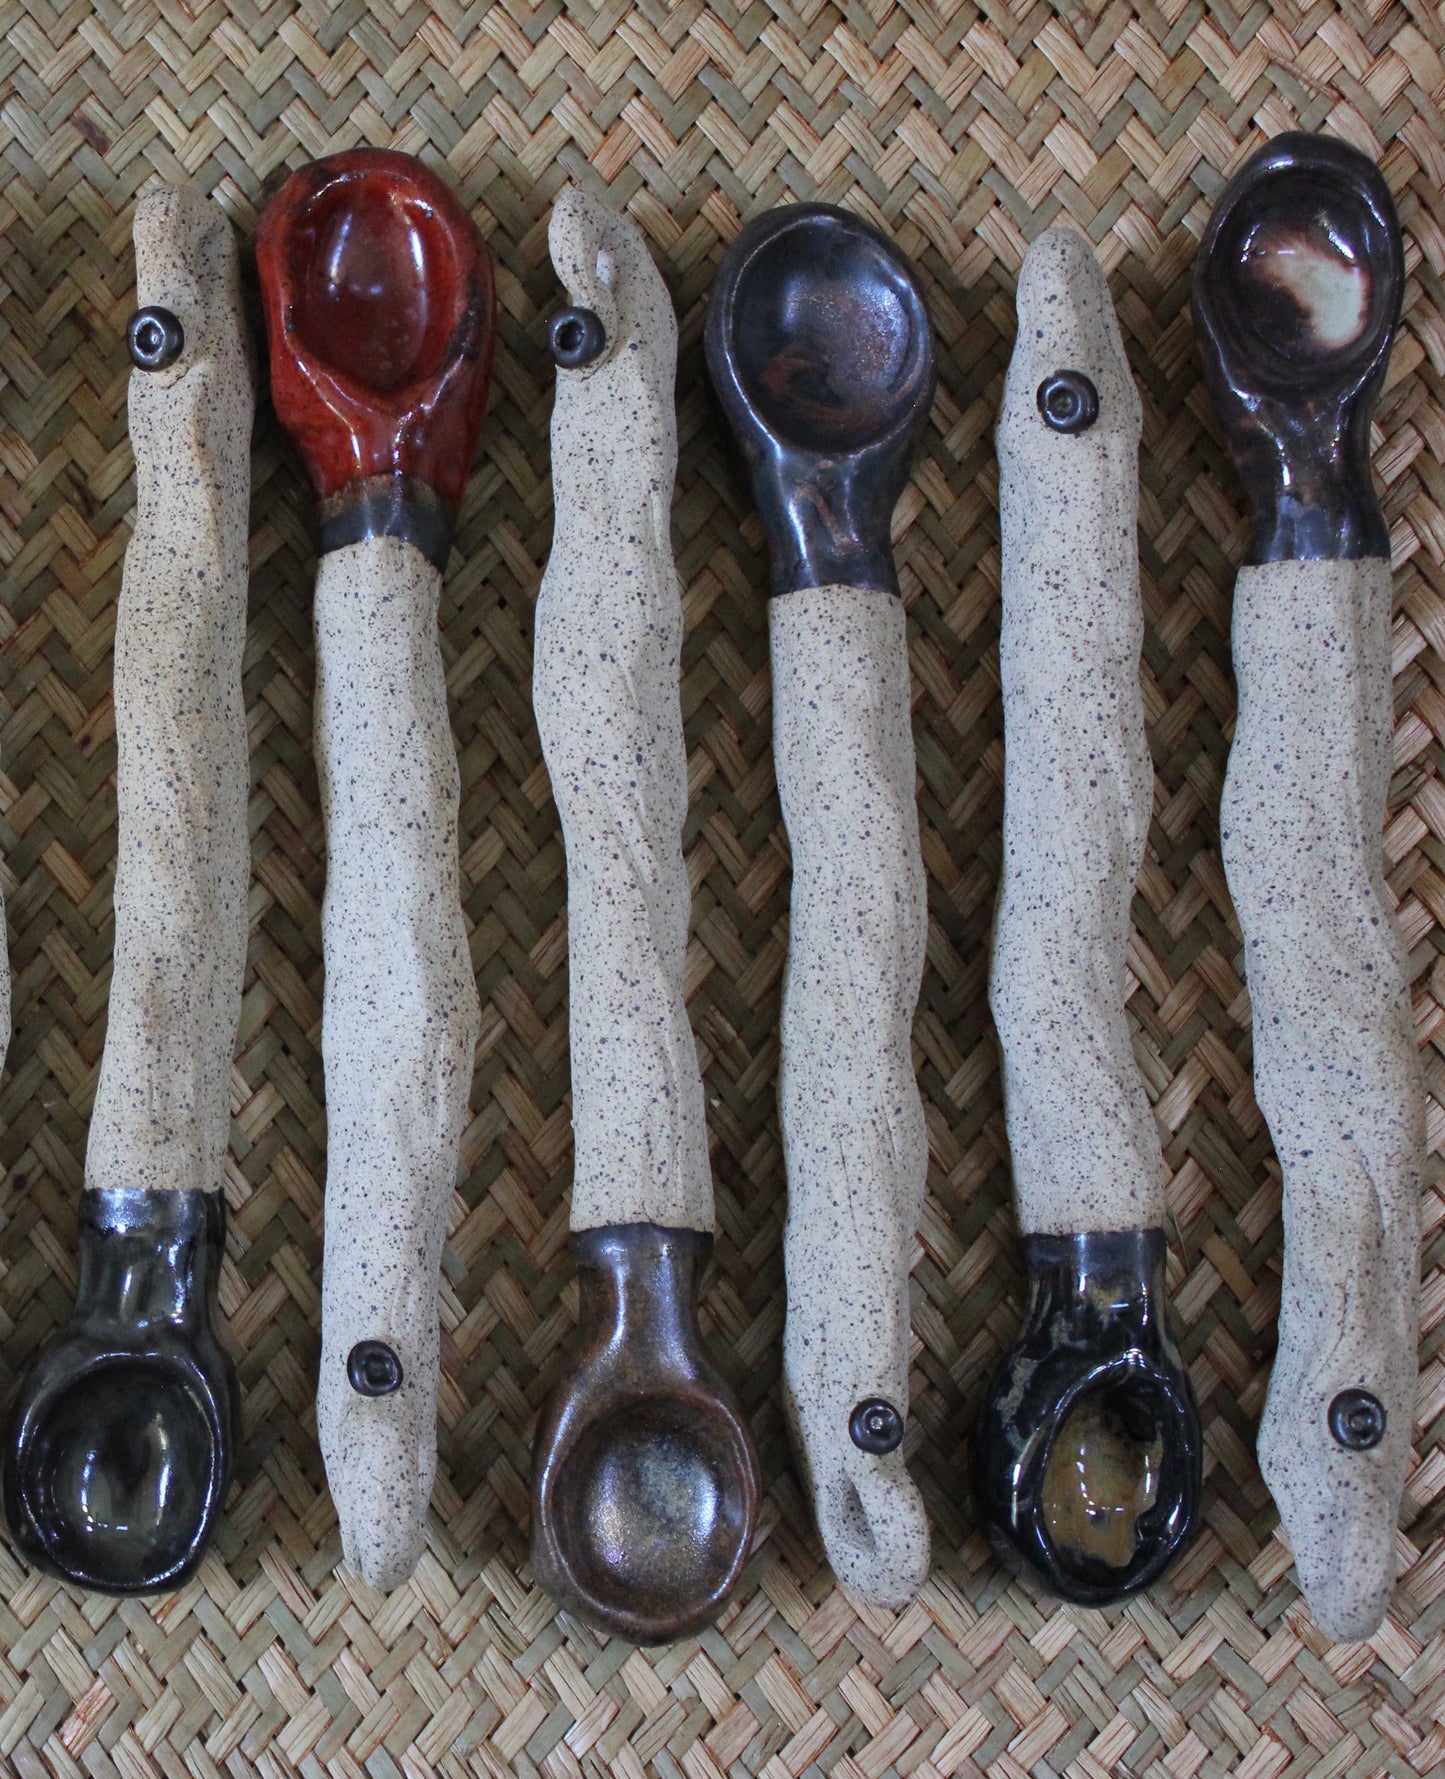 Earthy Ceramic Red-Brown Serving Spoon as a Unique Ornament or for Food Consumption